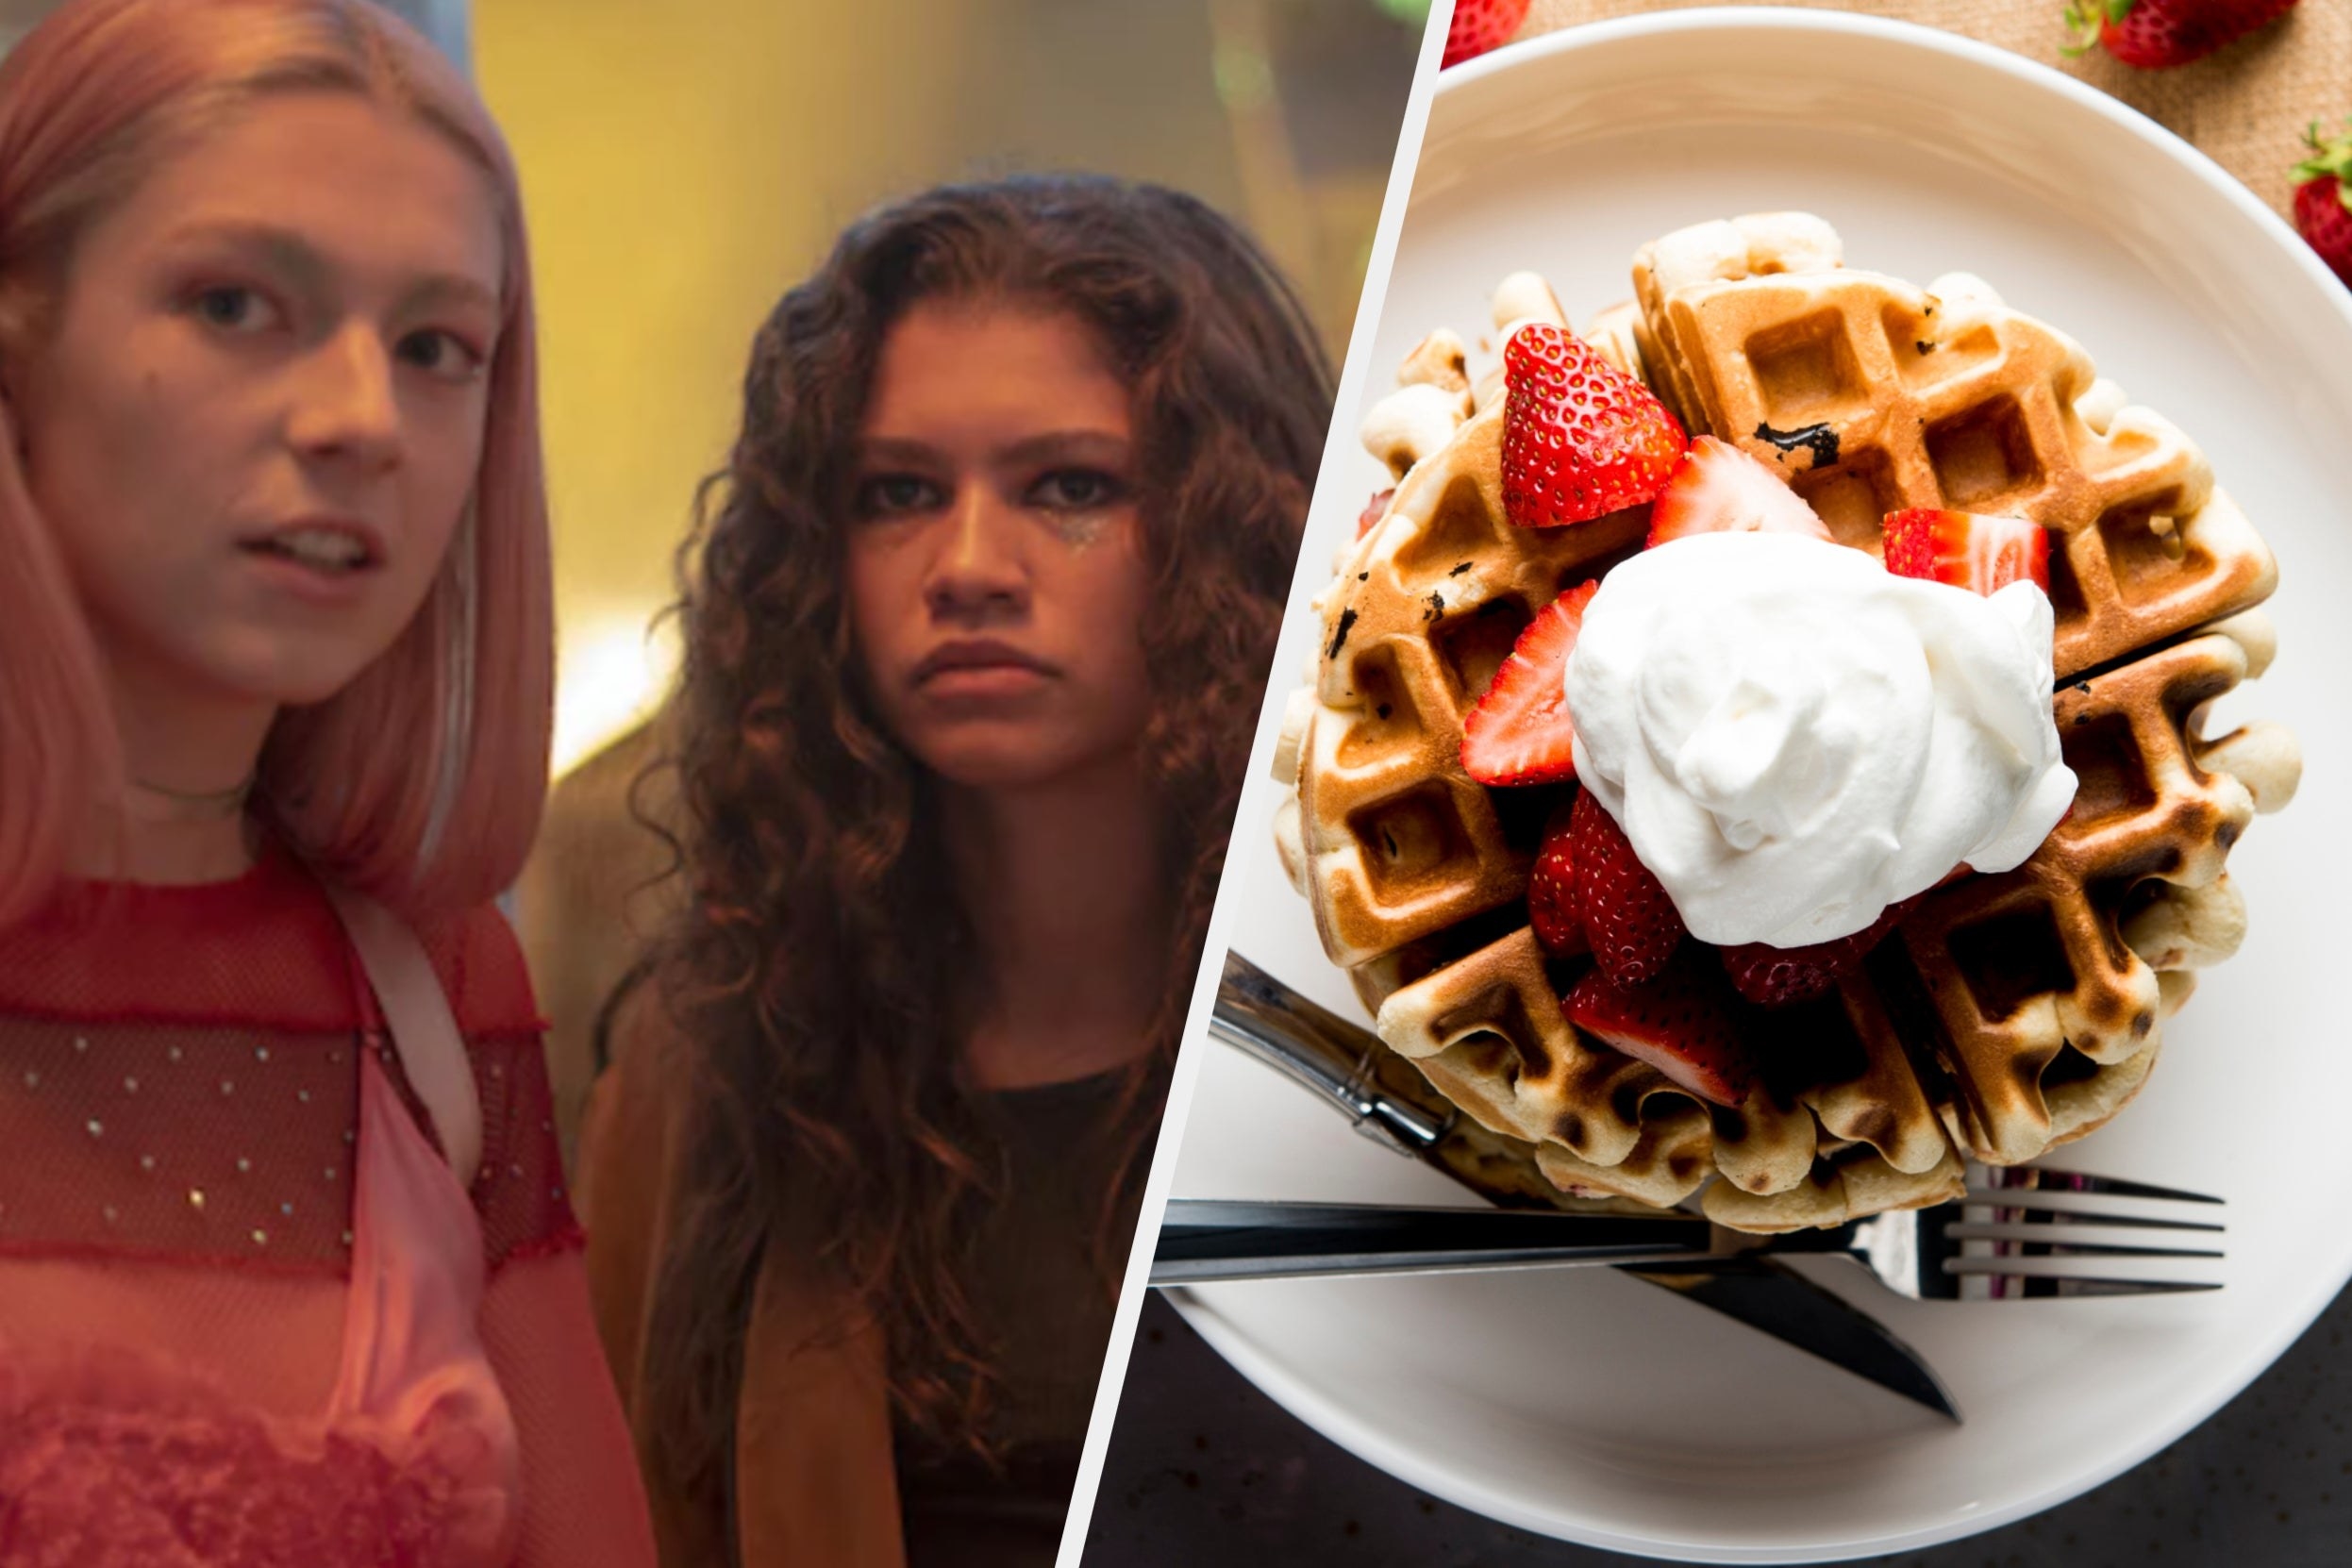 On the left: photo of Jules and Rue. On the right: top-view image of a stack of waffles